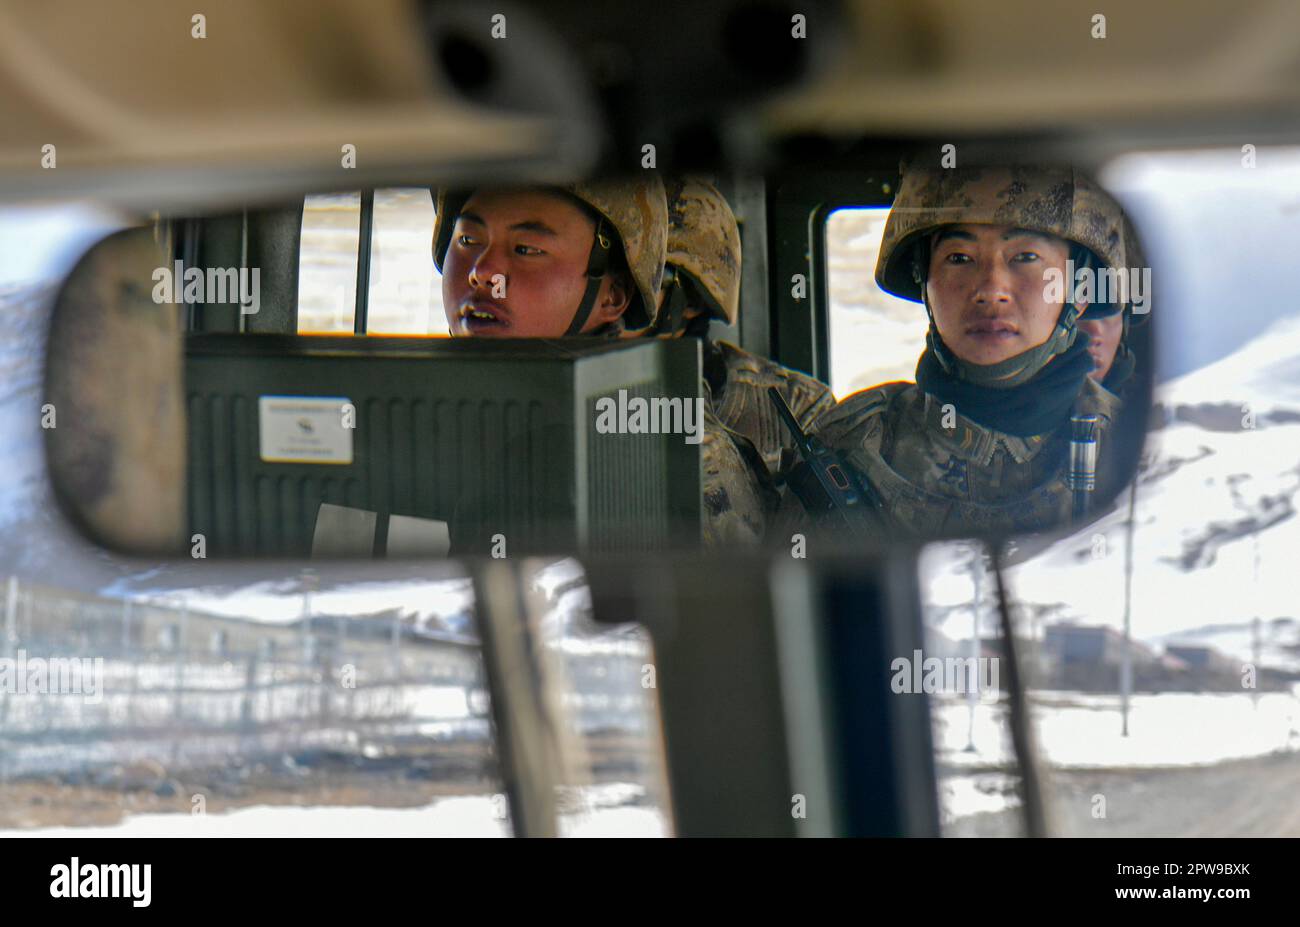 (230429) -- KHUNJERAB, April 29, 2023 (Xinhua) -- Zhou Linping (R) patrols in a car with other soldiers in Khunjerab, northwest China's Xinjiang Uygur Autonomous Region, April 14, 2023. Gao Guanghui, a recruit who had just joined the army for 7 months, was shocked when he walked into the honor room of the border defense regiment in Khunjerab, northwest?China's Xinjiang Uygur Autonomous Region. The regiment is based on the Pamirs, guarding the China-Pakistan border and Khunjerab Port. With an average altitude of 4,700 meters, the place is a 'forbidden zone' for many people, as the temperatu Stock Photo